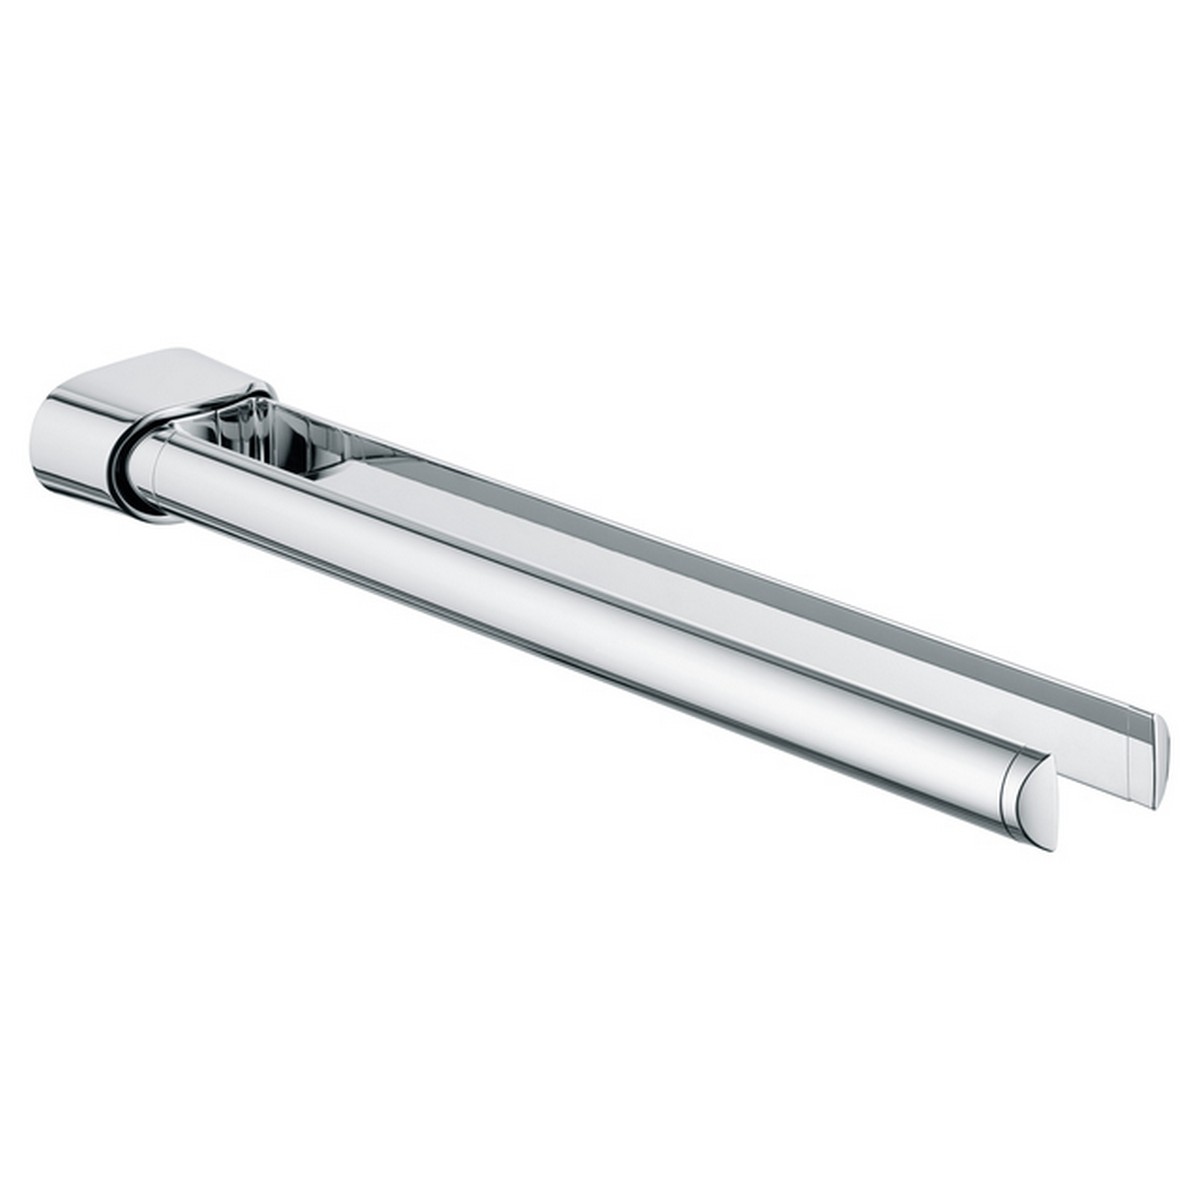 KEUCO 11620010000 ELEGANCE 13 3/8 INCH WALL MOUNTED DOUBLE TOWEL HOLDER IN POLISHED CHROME